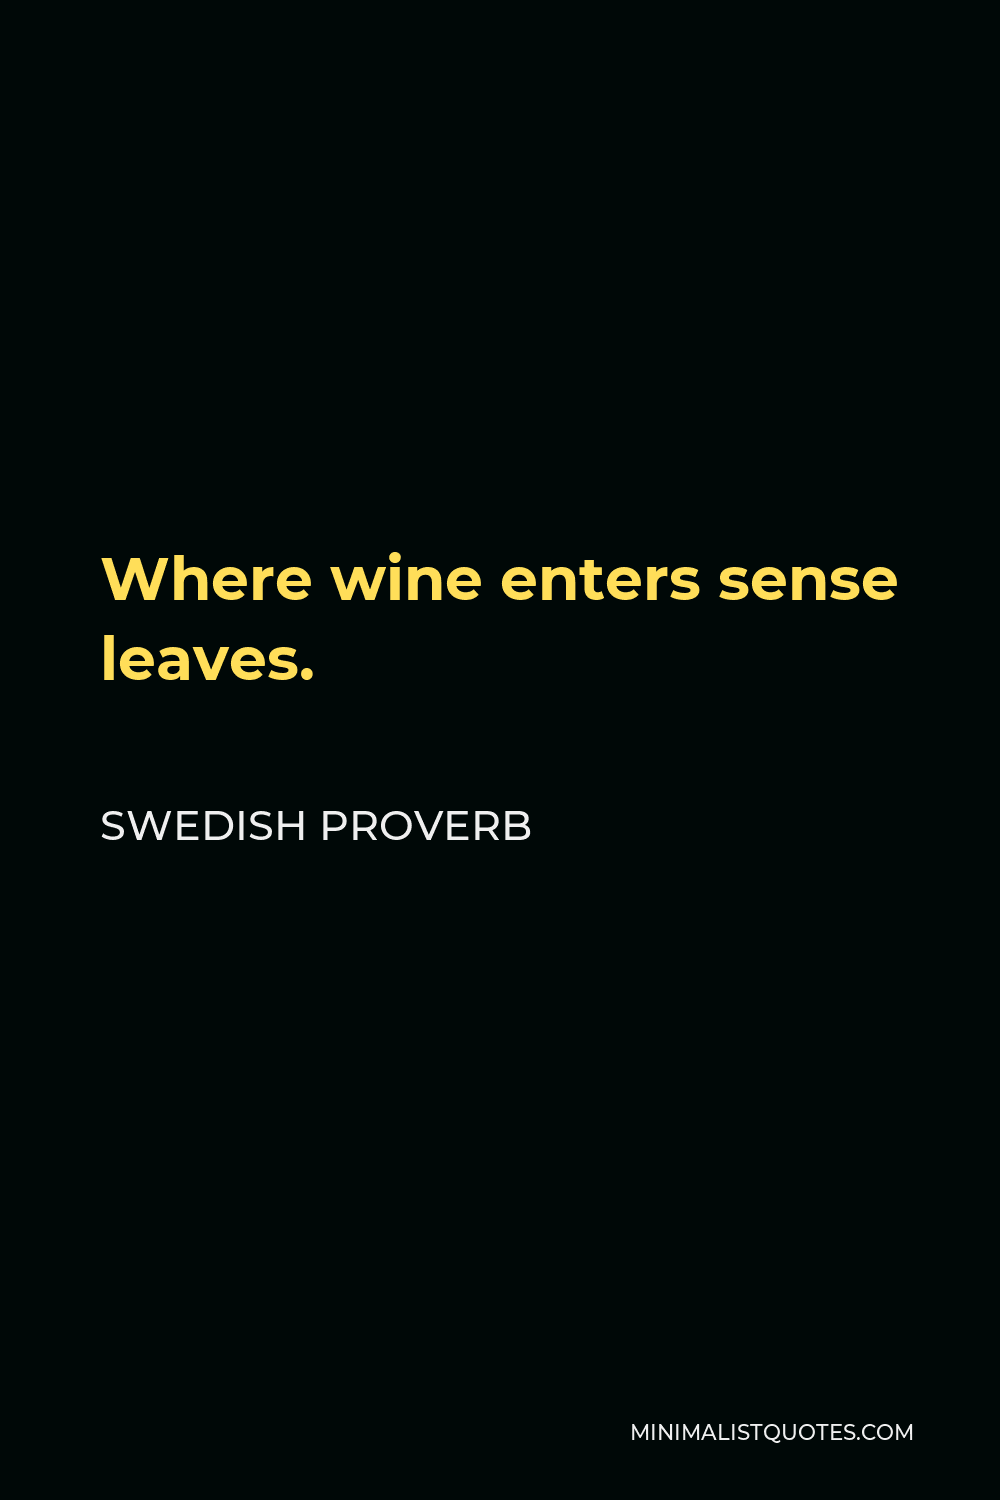 Swedish Proverb Quote - Where wine enters sense leaves.